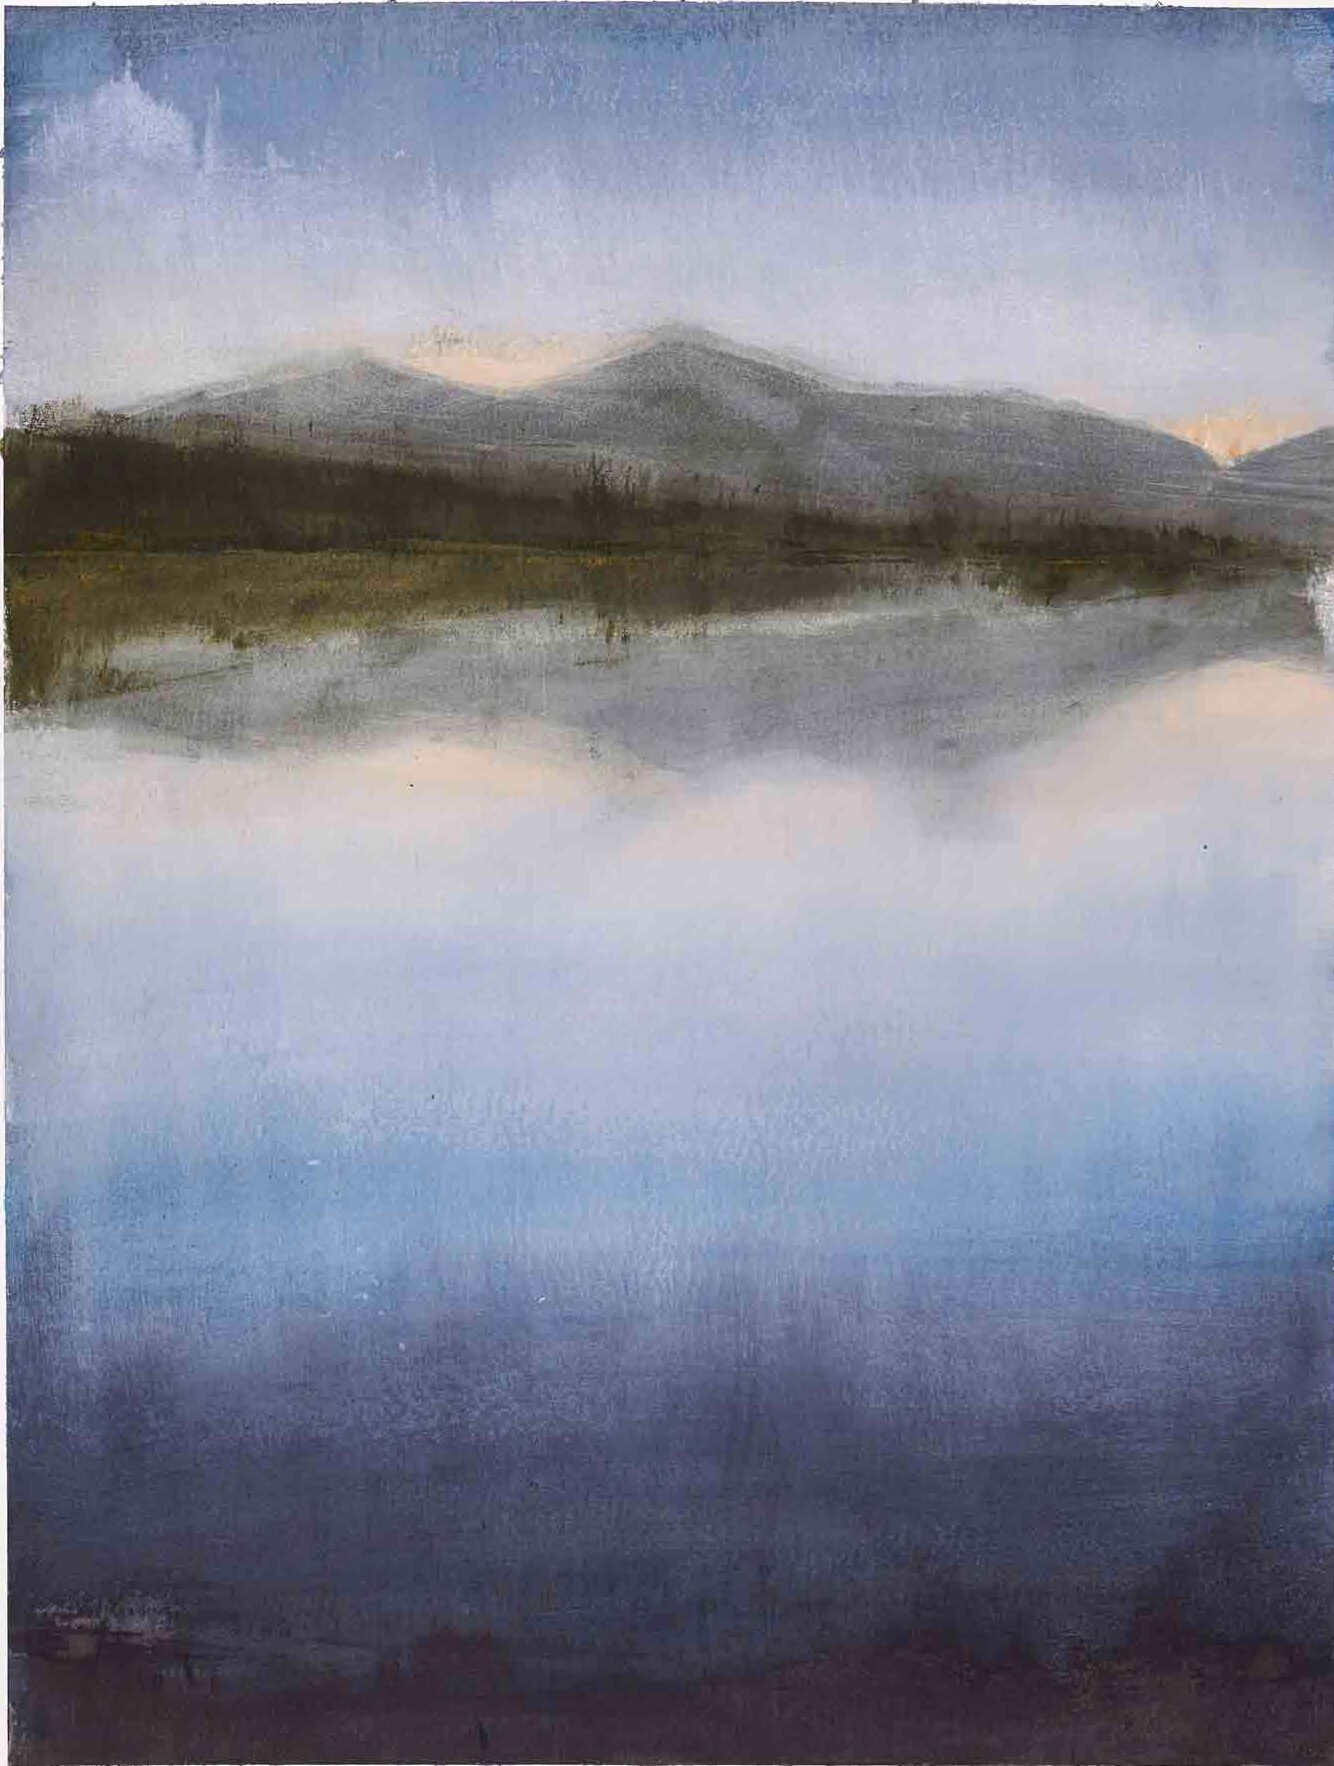 Reflected Sunrise On Loch Drimore On South Uist In The Outer Hebrides - Landscape Painting By Victoria Orr Ewing